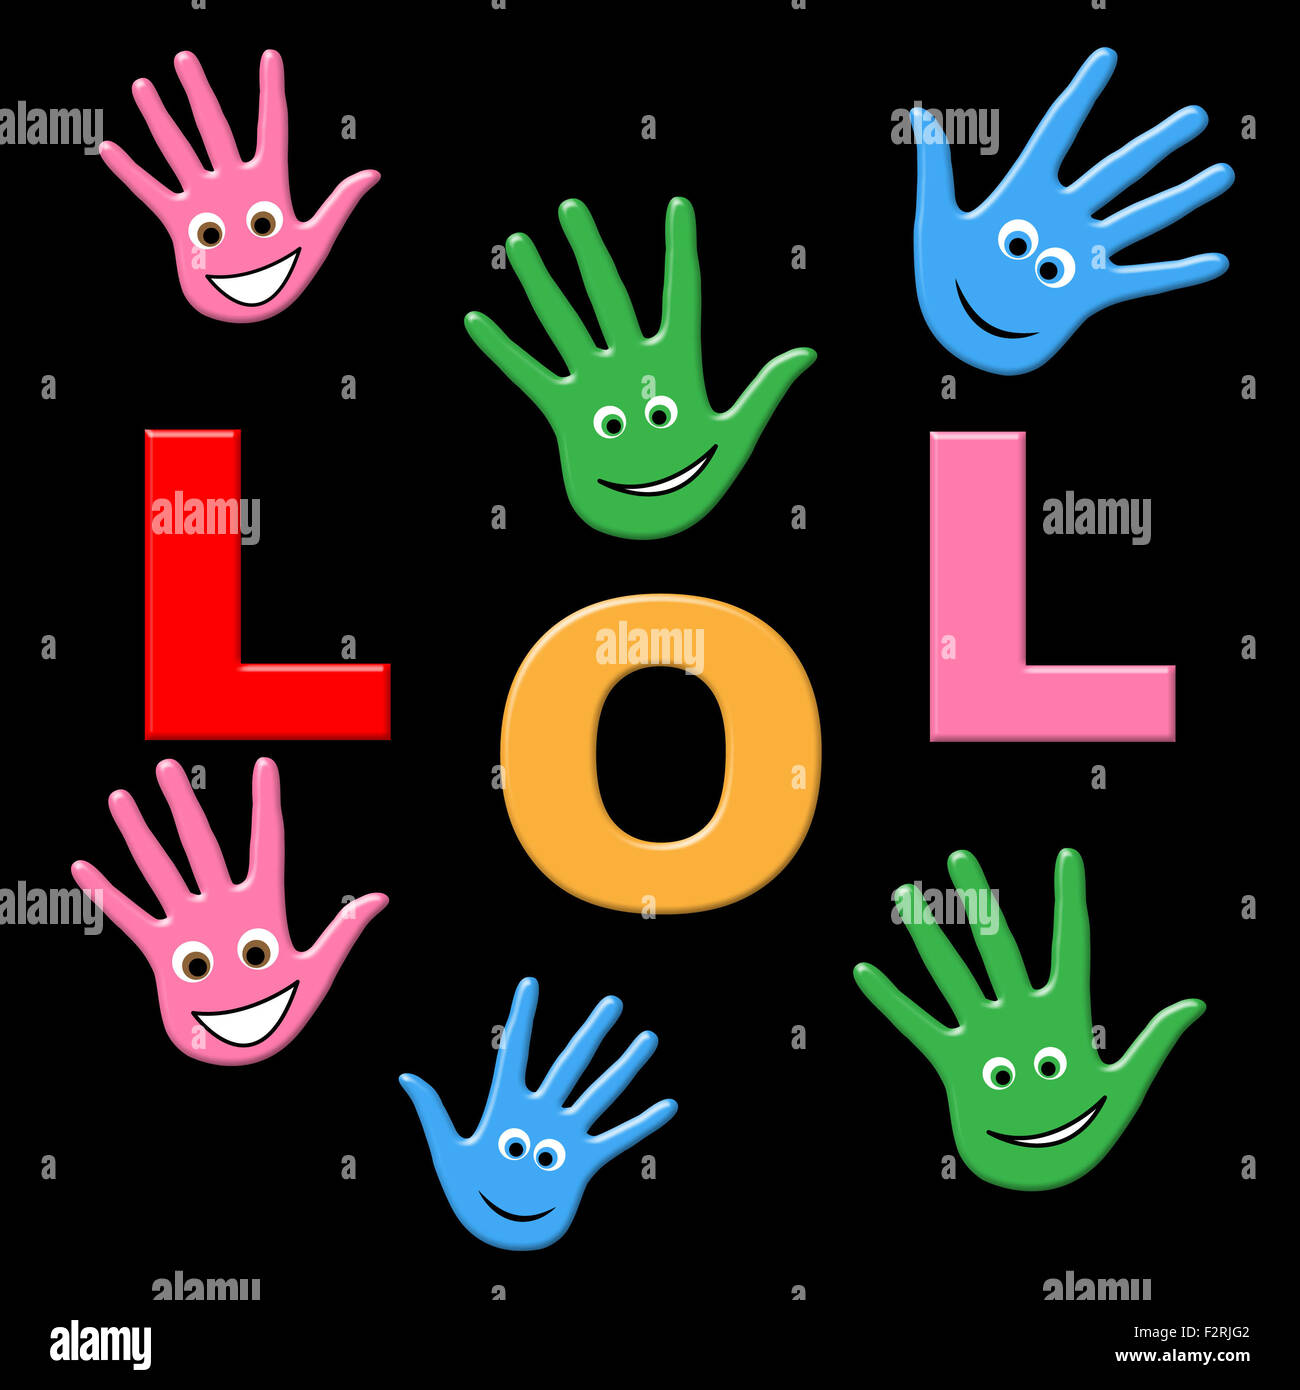 Kids Lol Representing Laughing Out Loud And Child Stock Photo